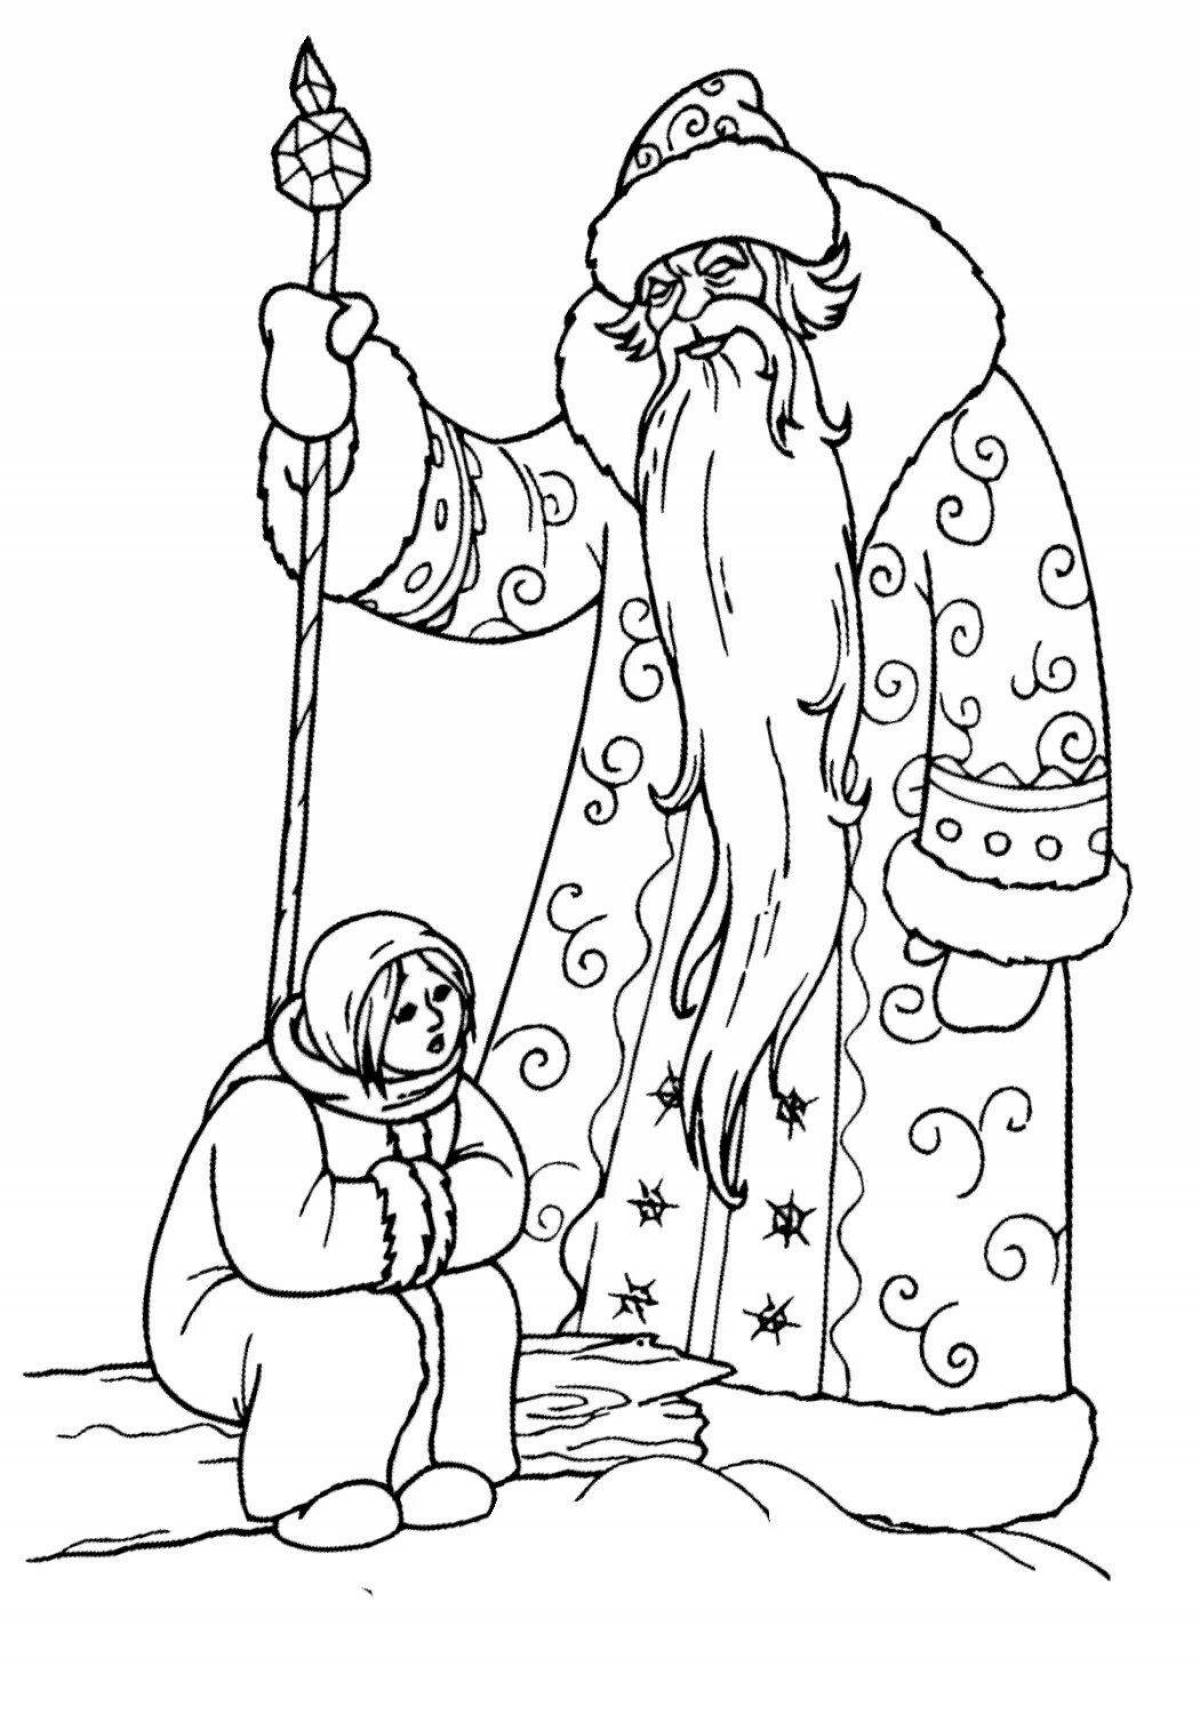 Charming coloring page 2 frosty fairy tale